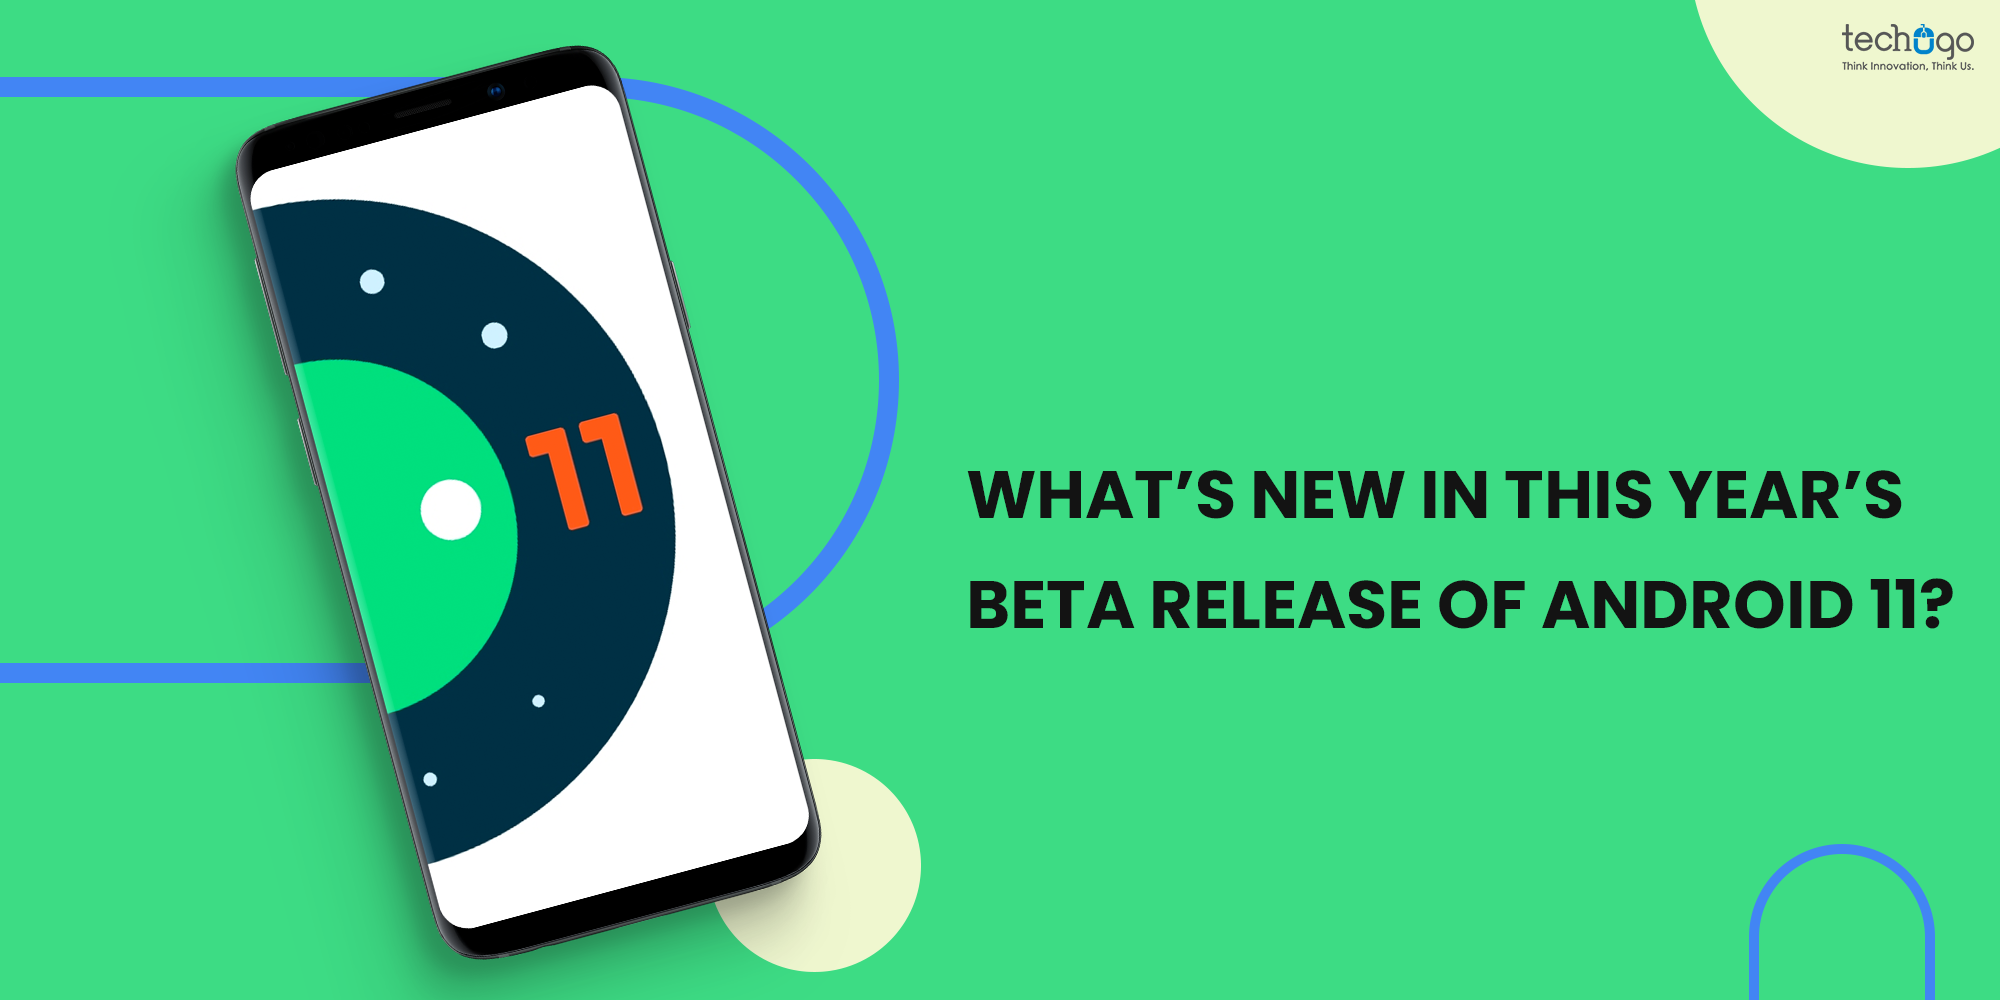 What’s New In This Year’s Beta Release Of Android 11?